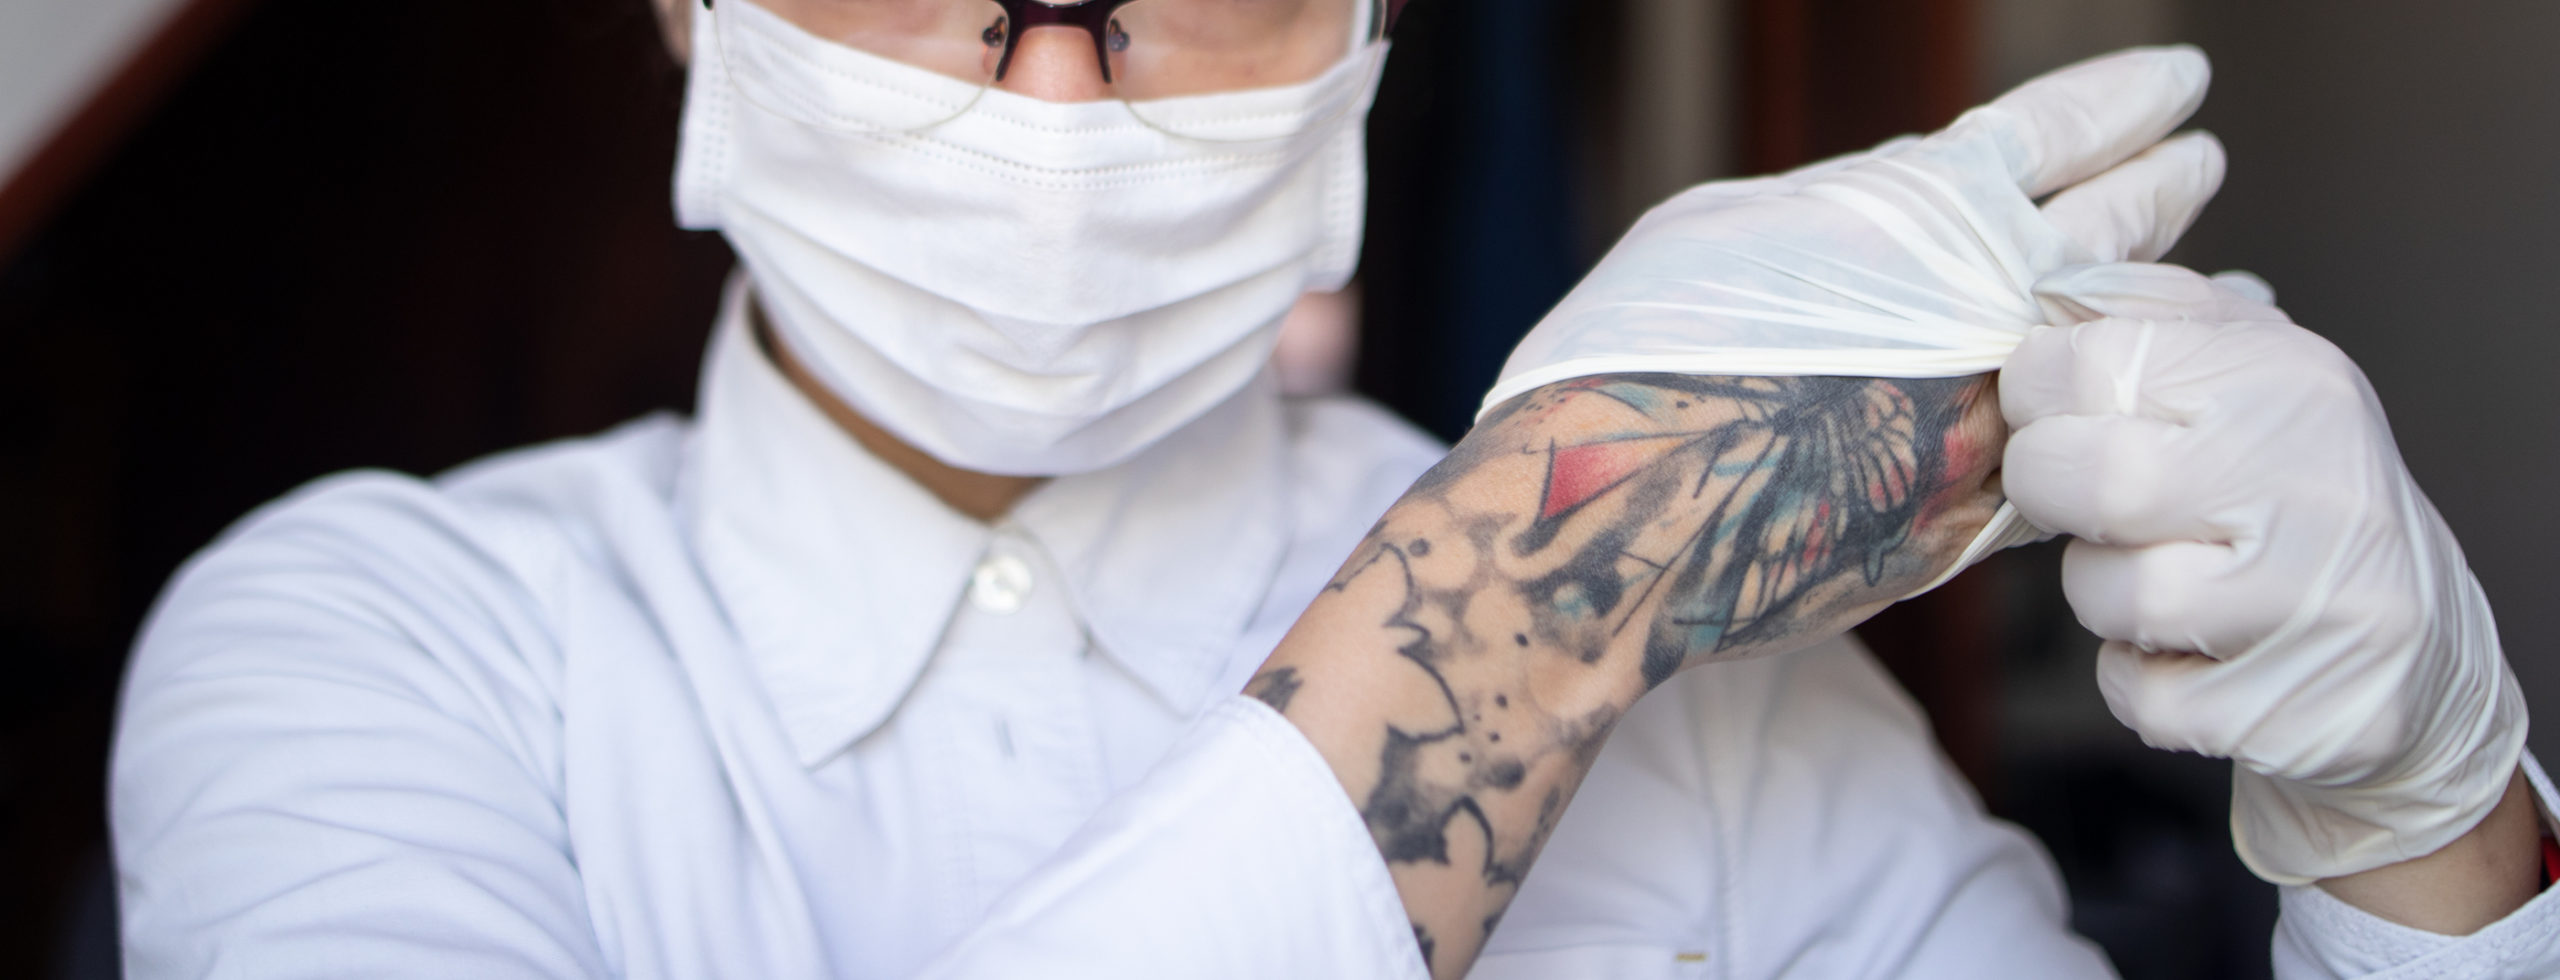 Can Nurses Have Tattoos and Nose Piercings?